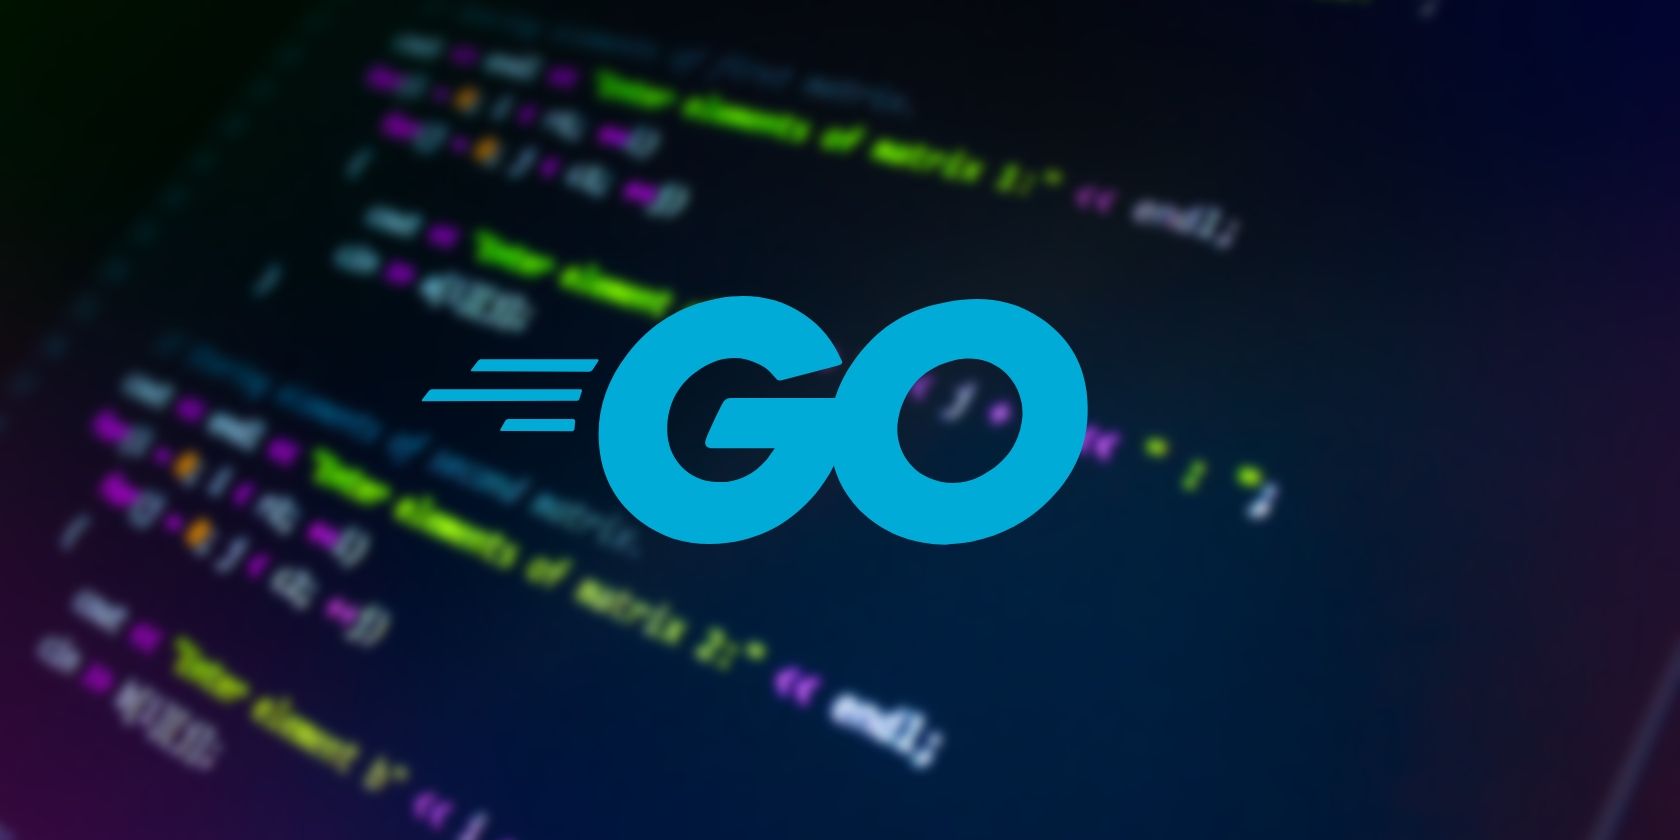 GO logo in foreground code in background